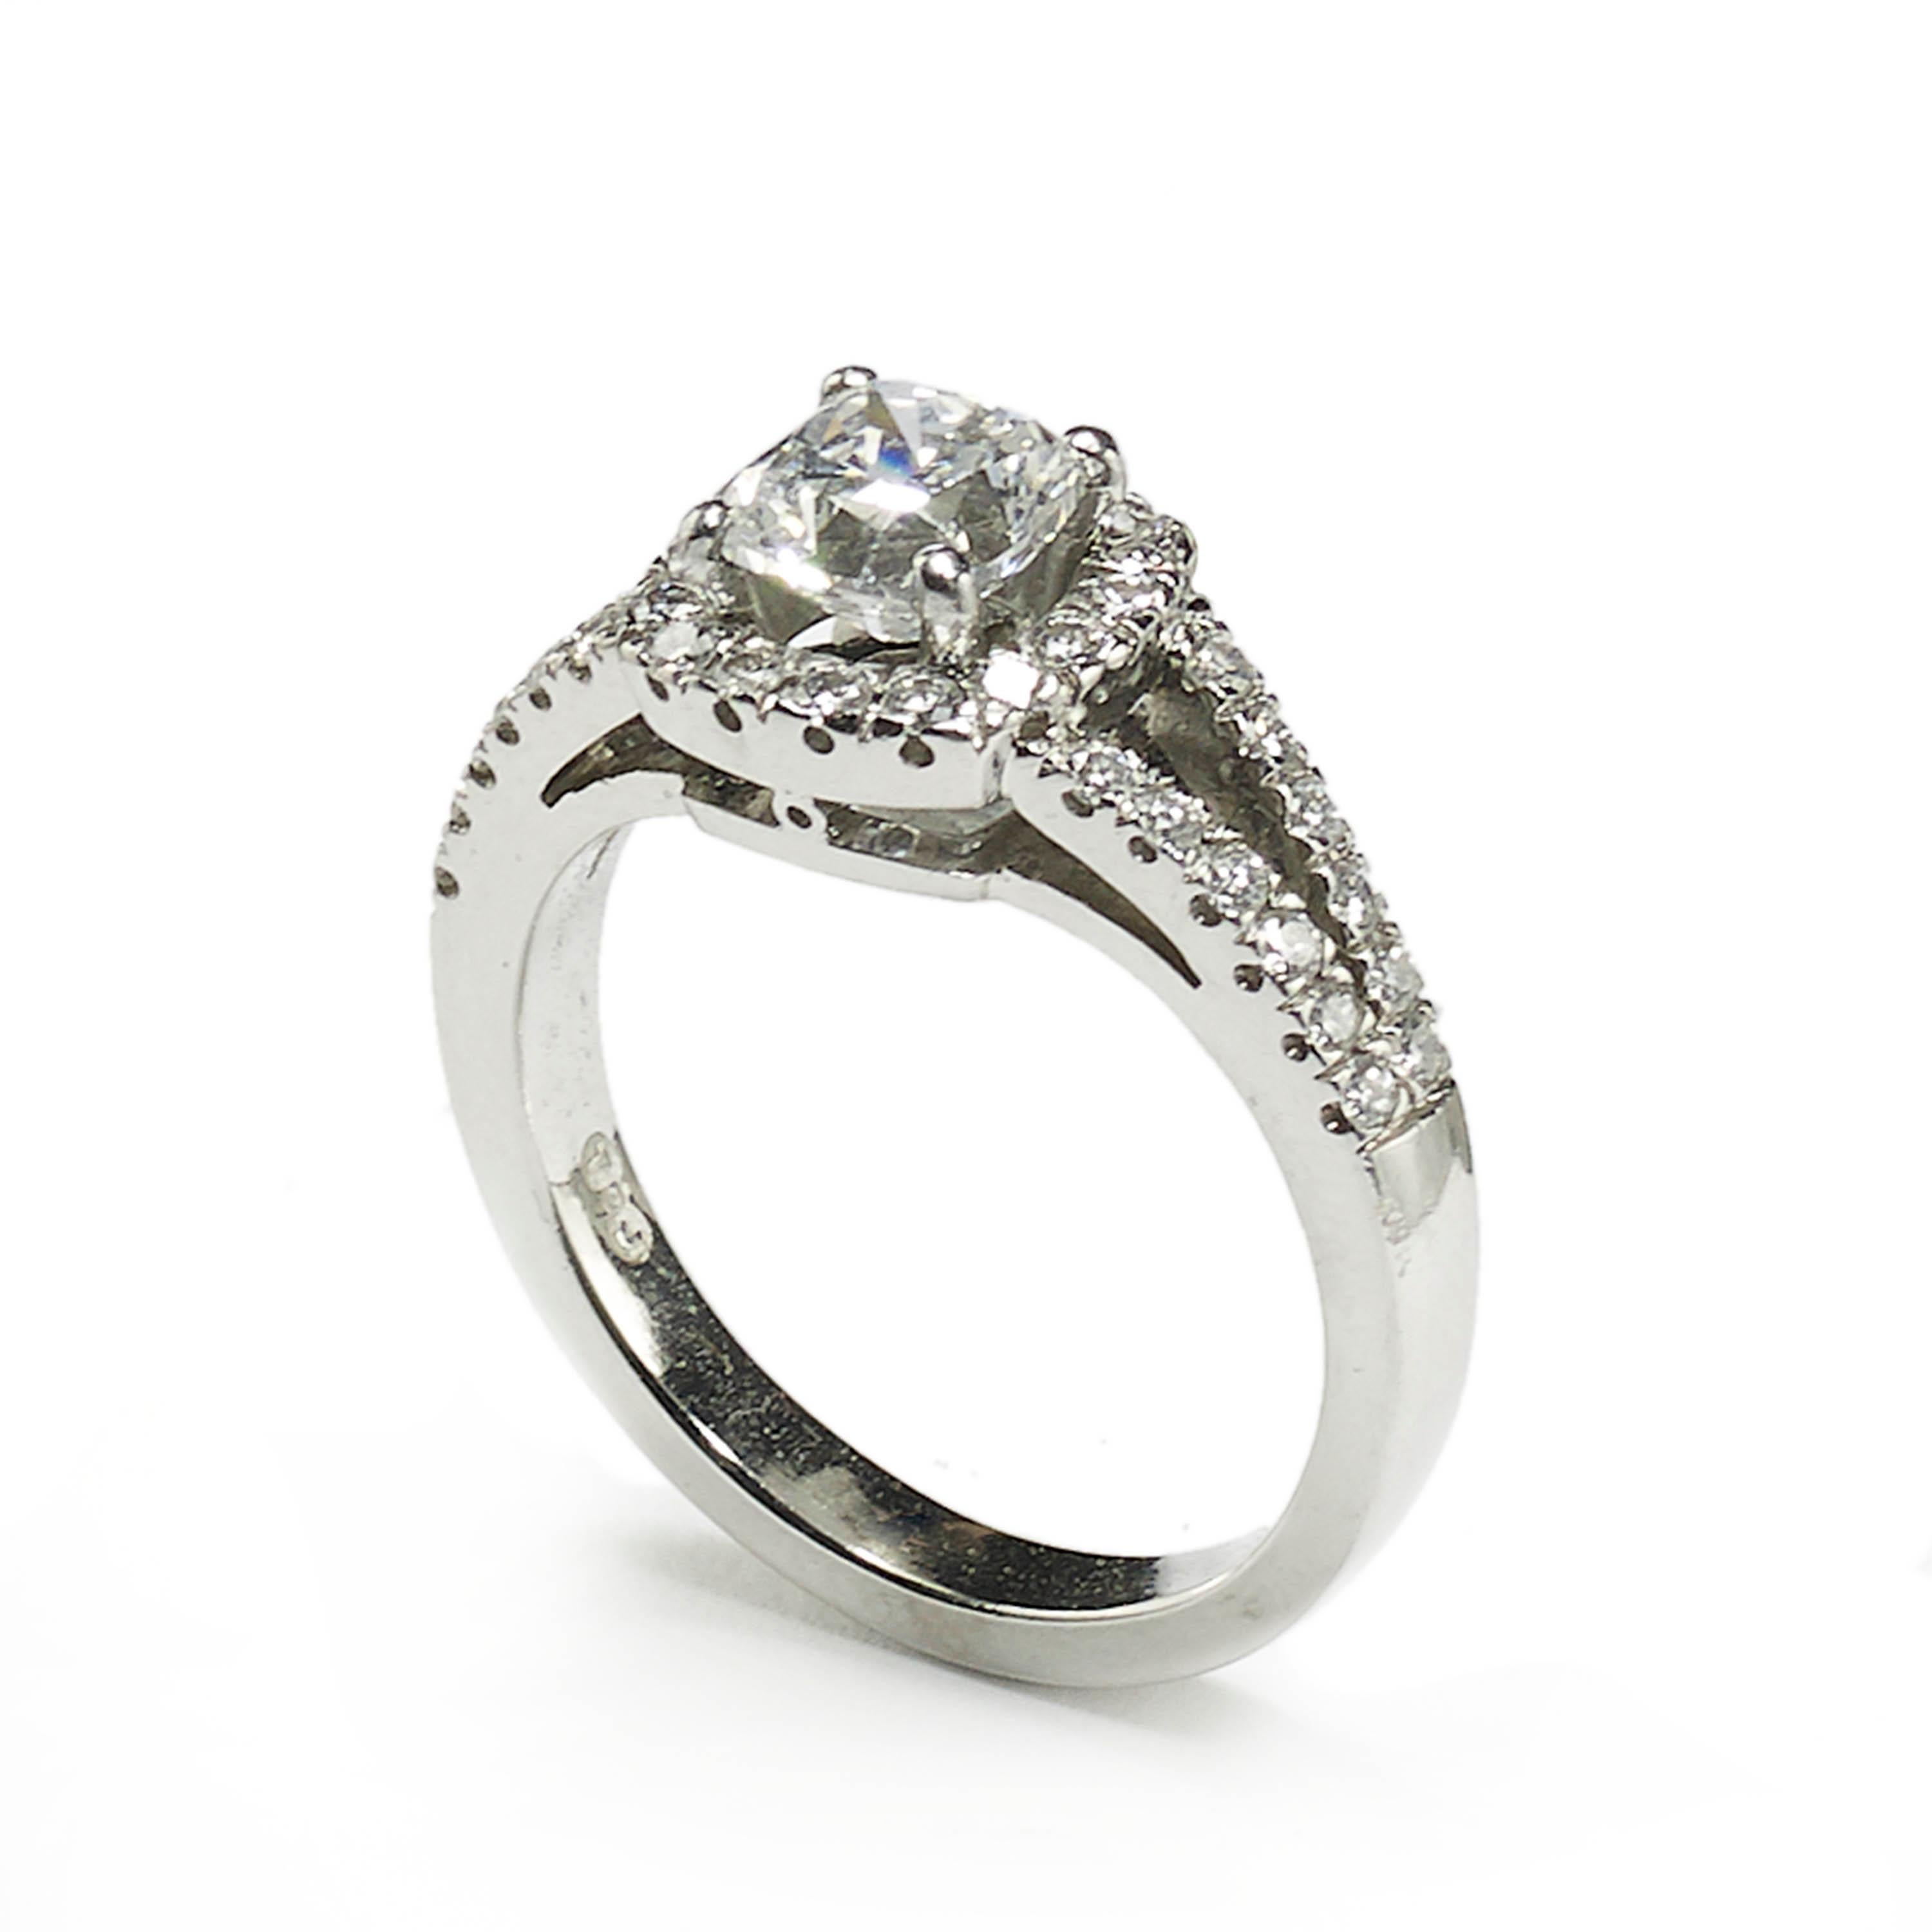 A diamond solitaire ring, set with a 1.01ct, D colour, S11 clarity, cushion brilliant-cut diamond, in a four claw setting, with a round brilliant-cut diamond surround and diamond set split shoulders, mounted in platinum, accompanied by a GIA